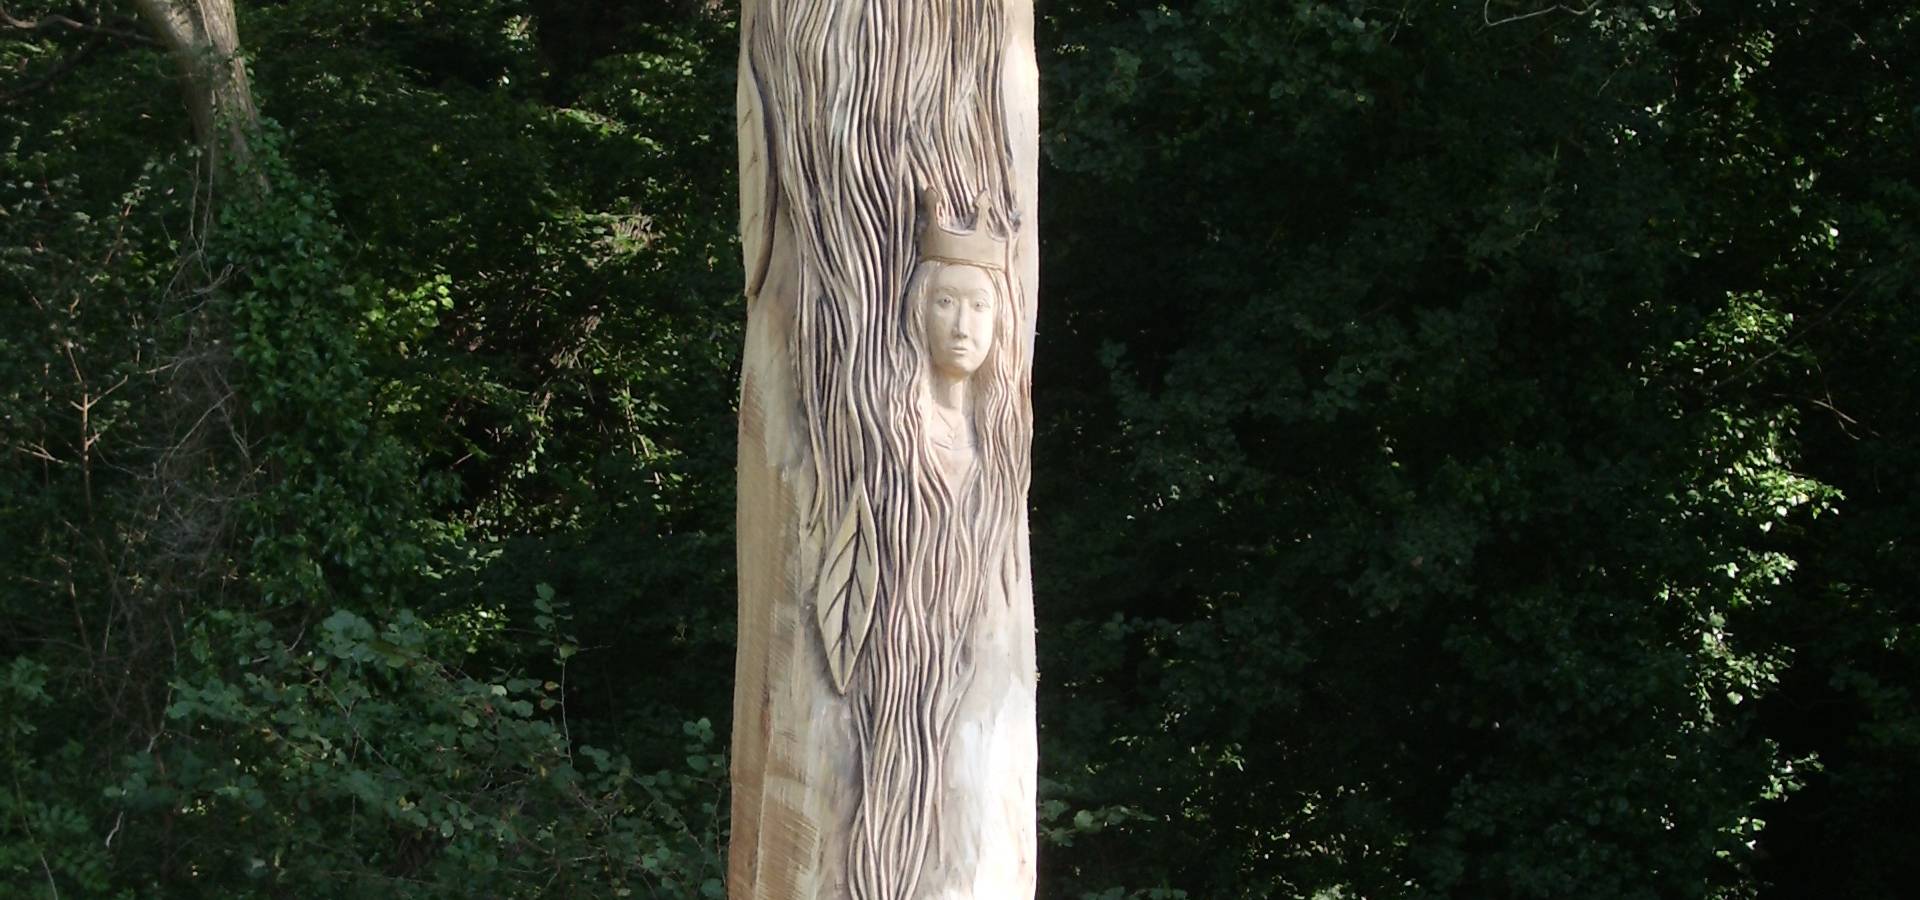 The Carved Tree